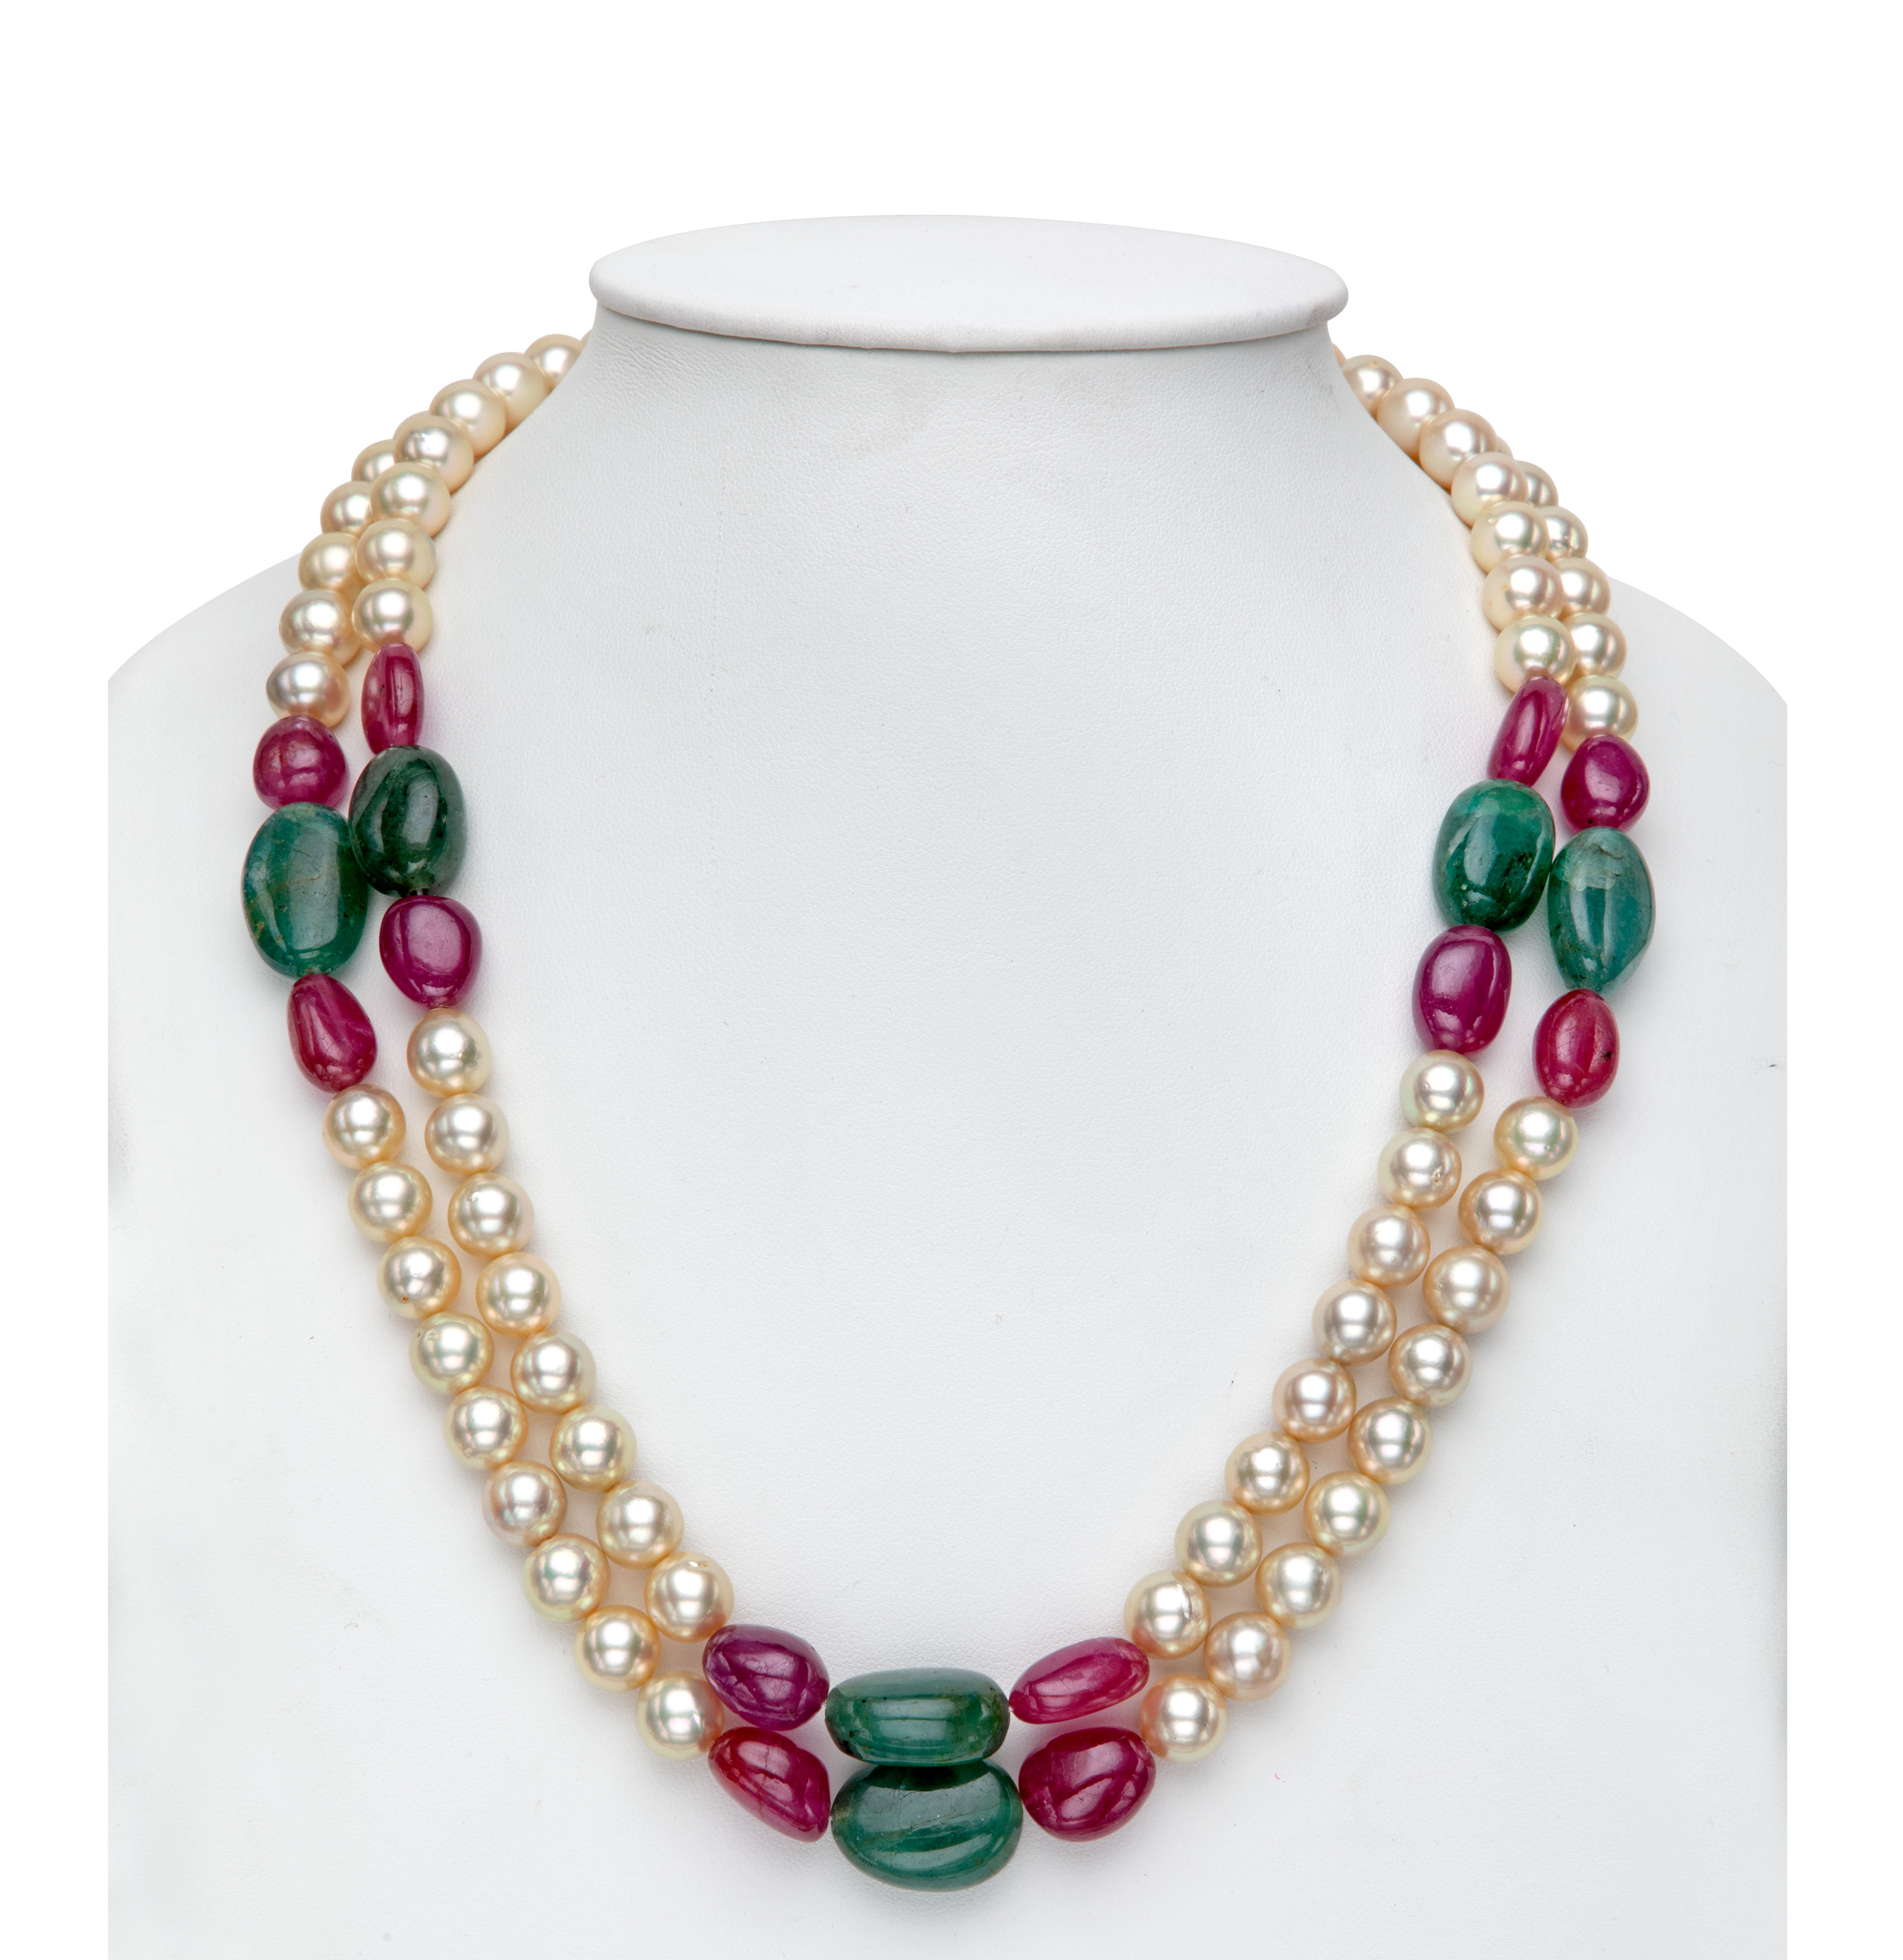 Real Ruby Emerald Beads and Golden Saltwater Akoya Pearls Necklace Set Mangatrai Pearls